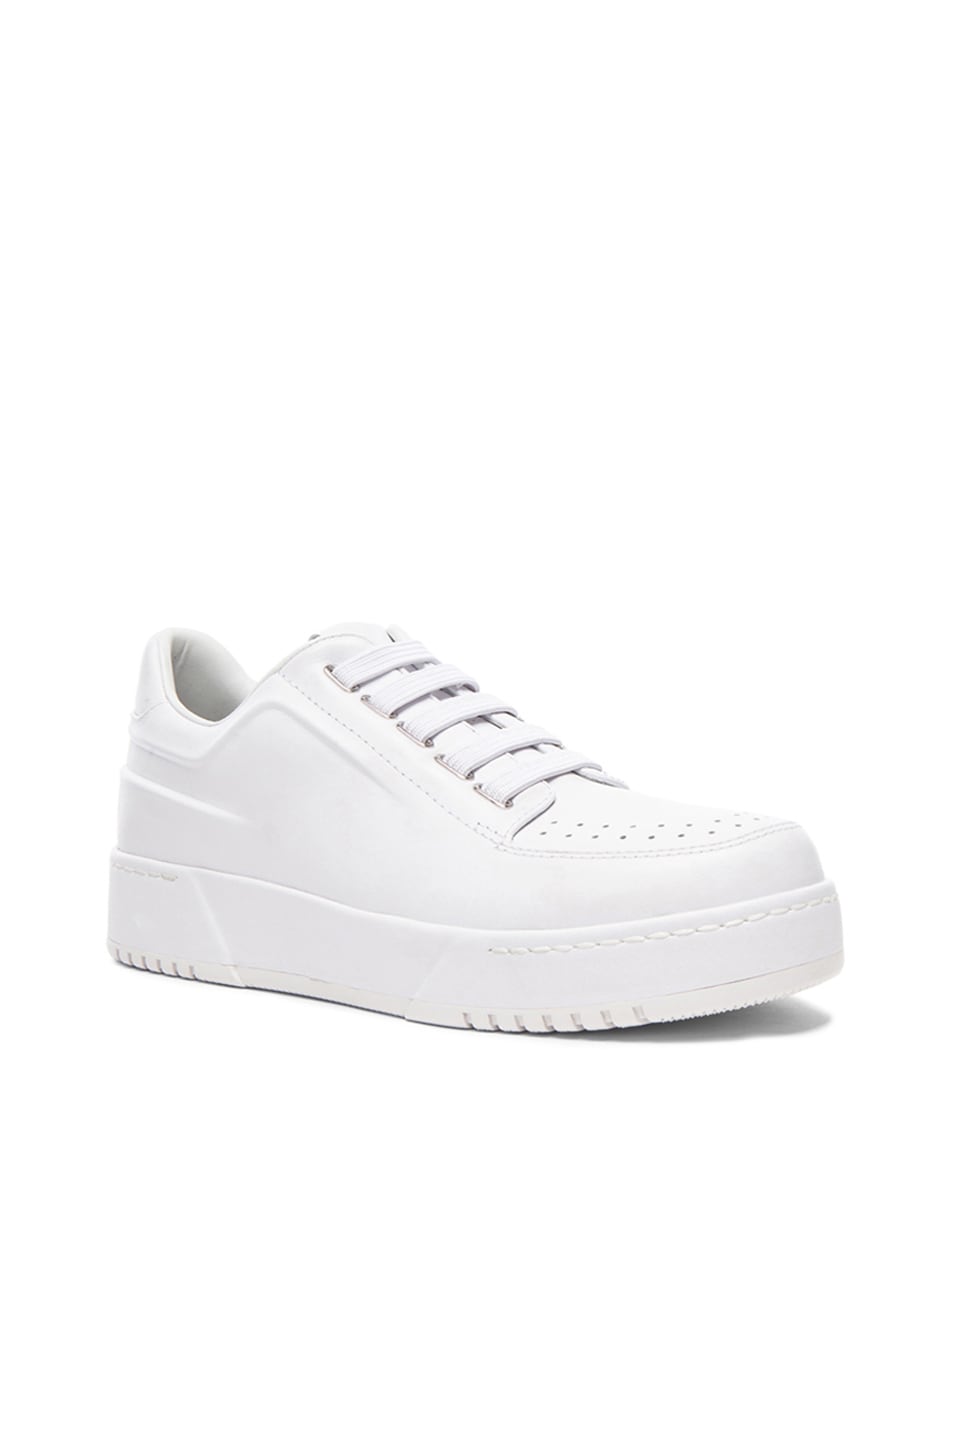 Image 1 of 3.1 phillip lim PL31 Low Top Calfskin Leather Sneakers in White